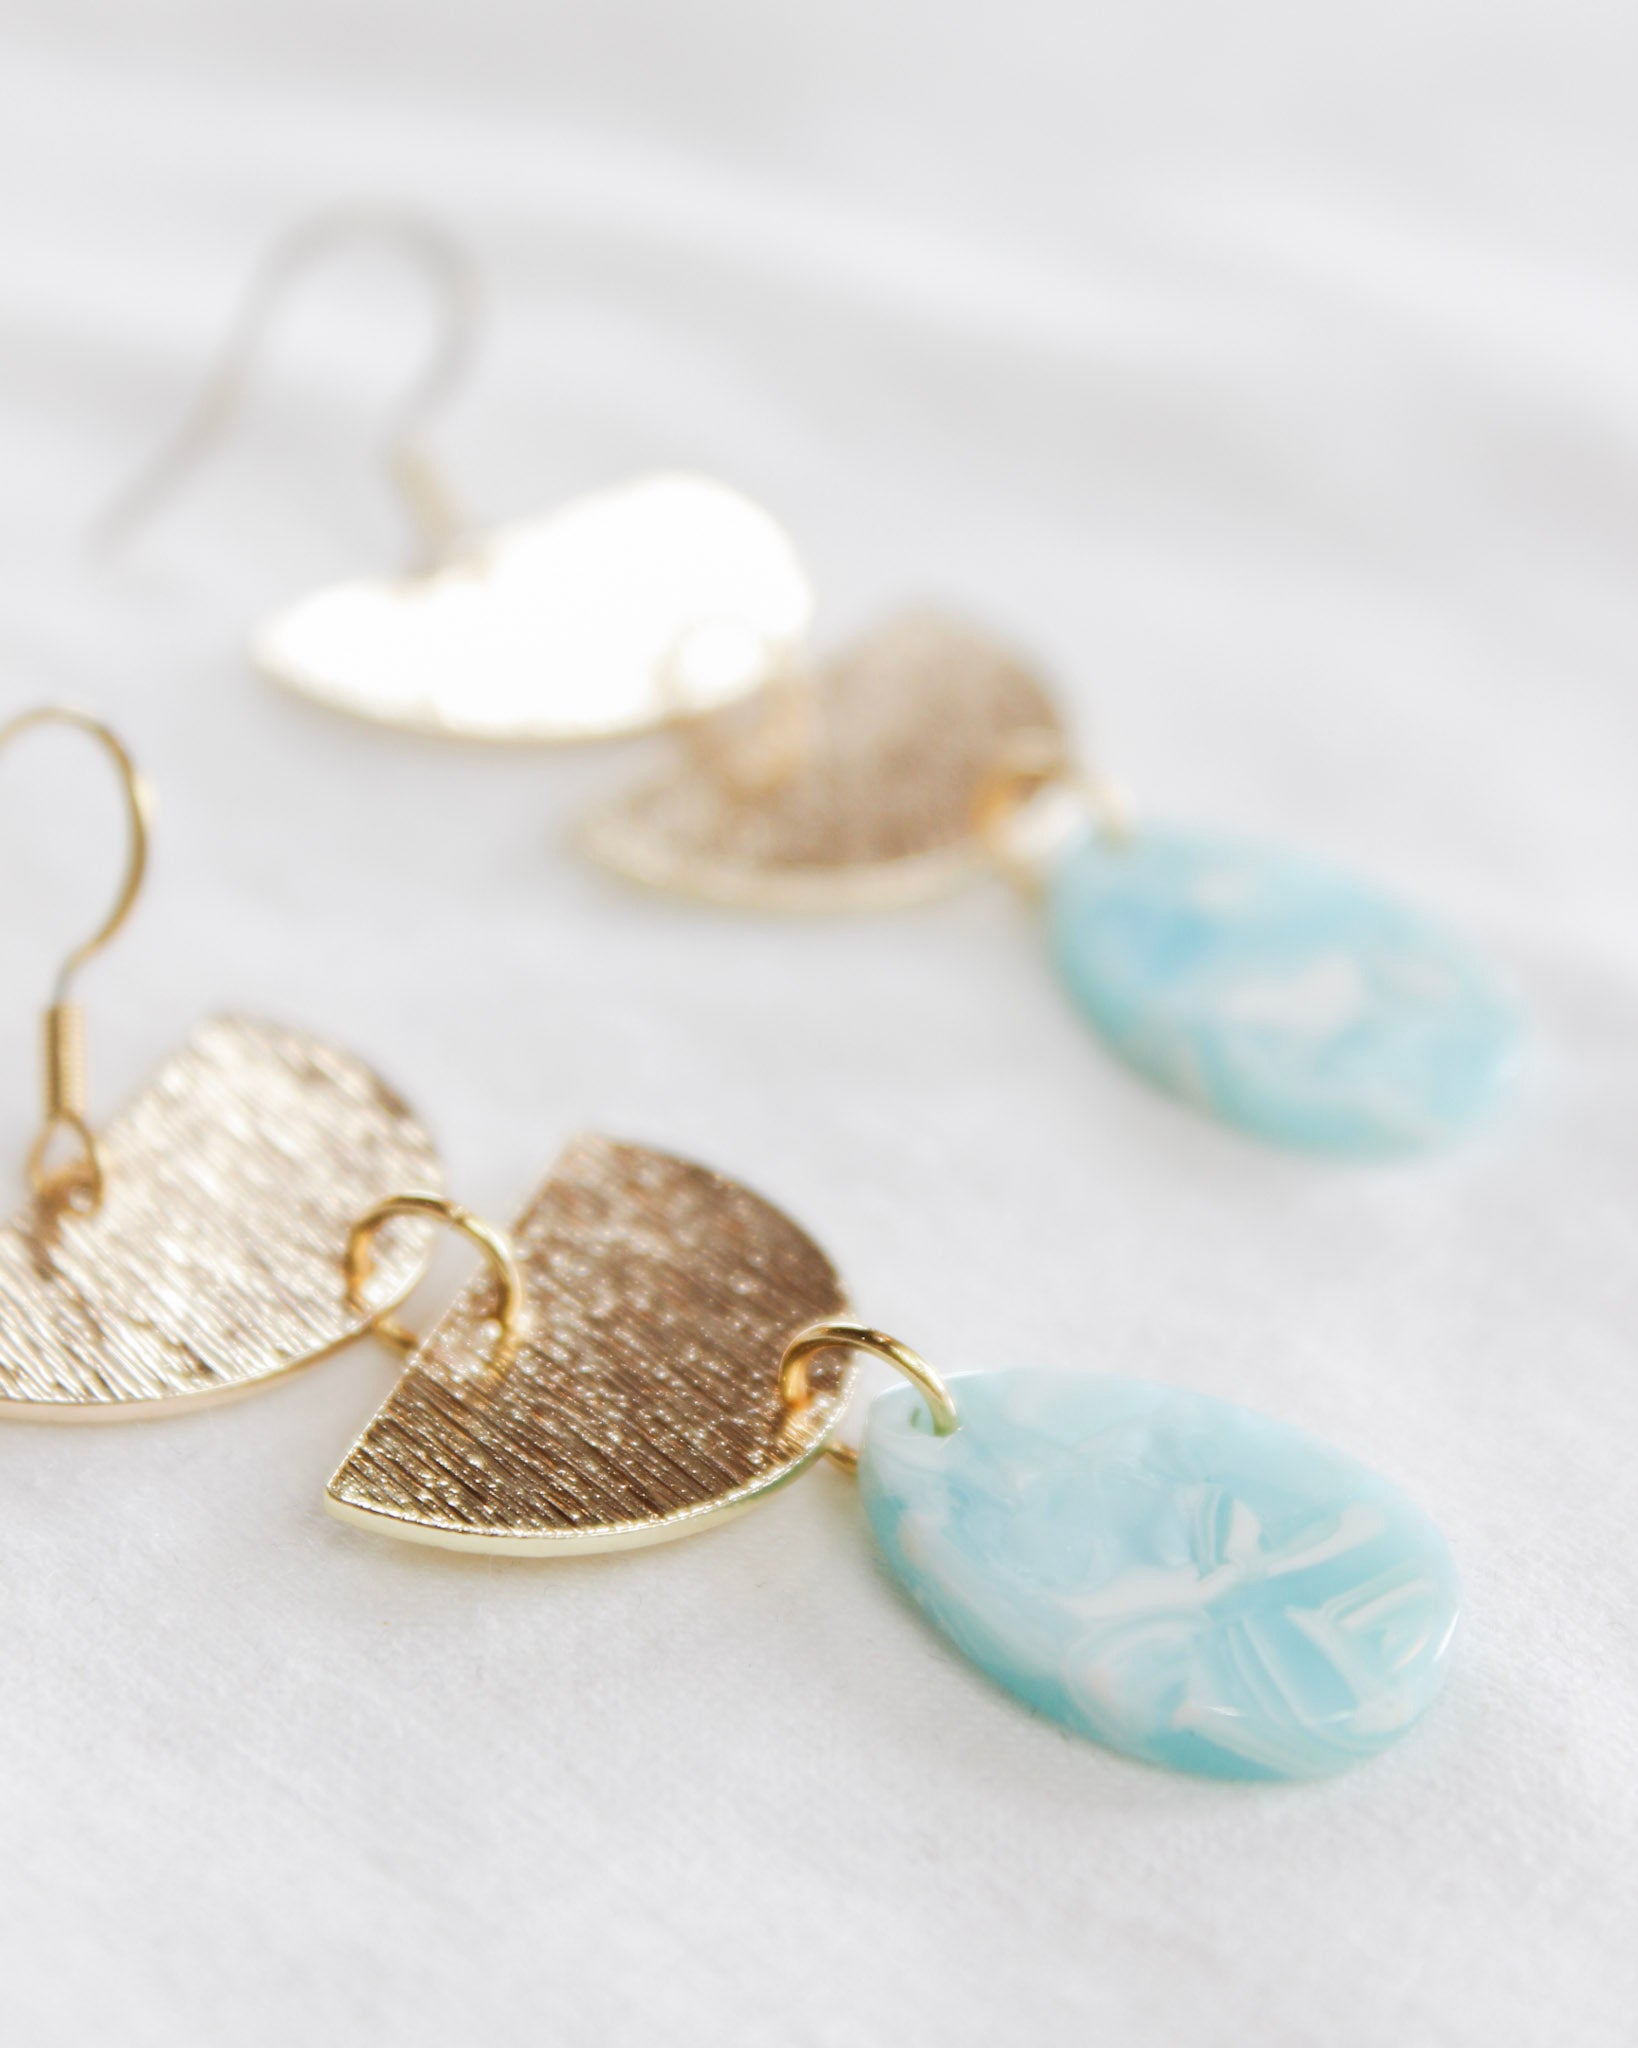 Boho gold dangle earrings with two upside down half moon chained with oval baby blue stone at the end